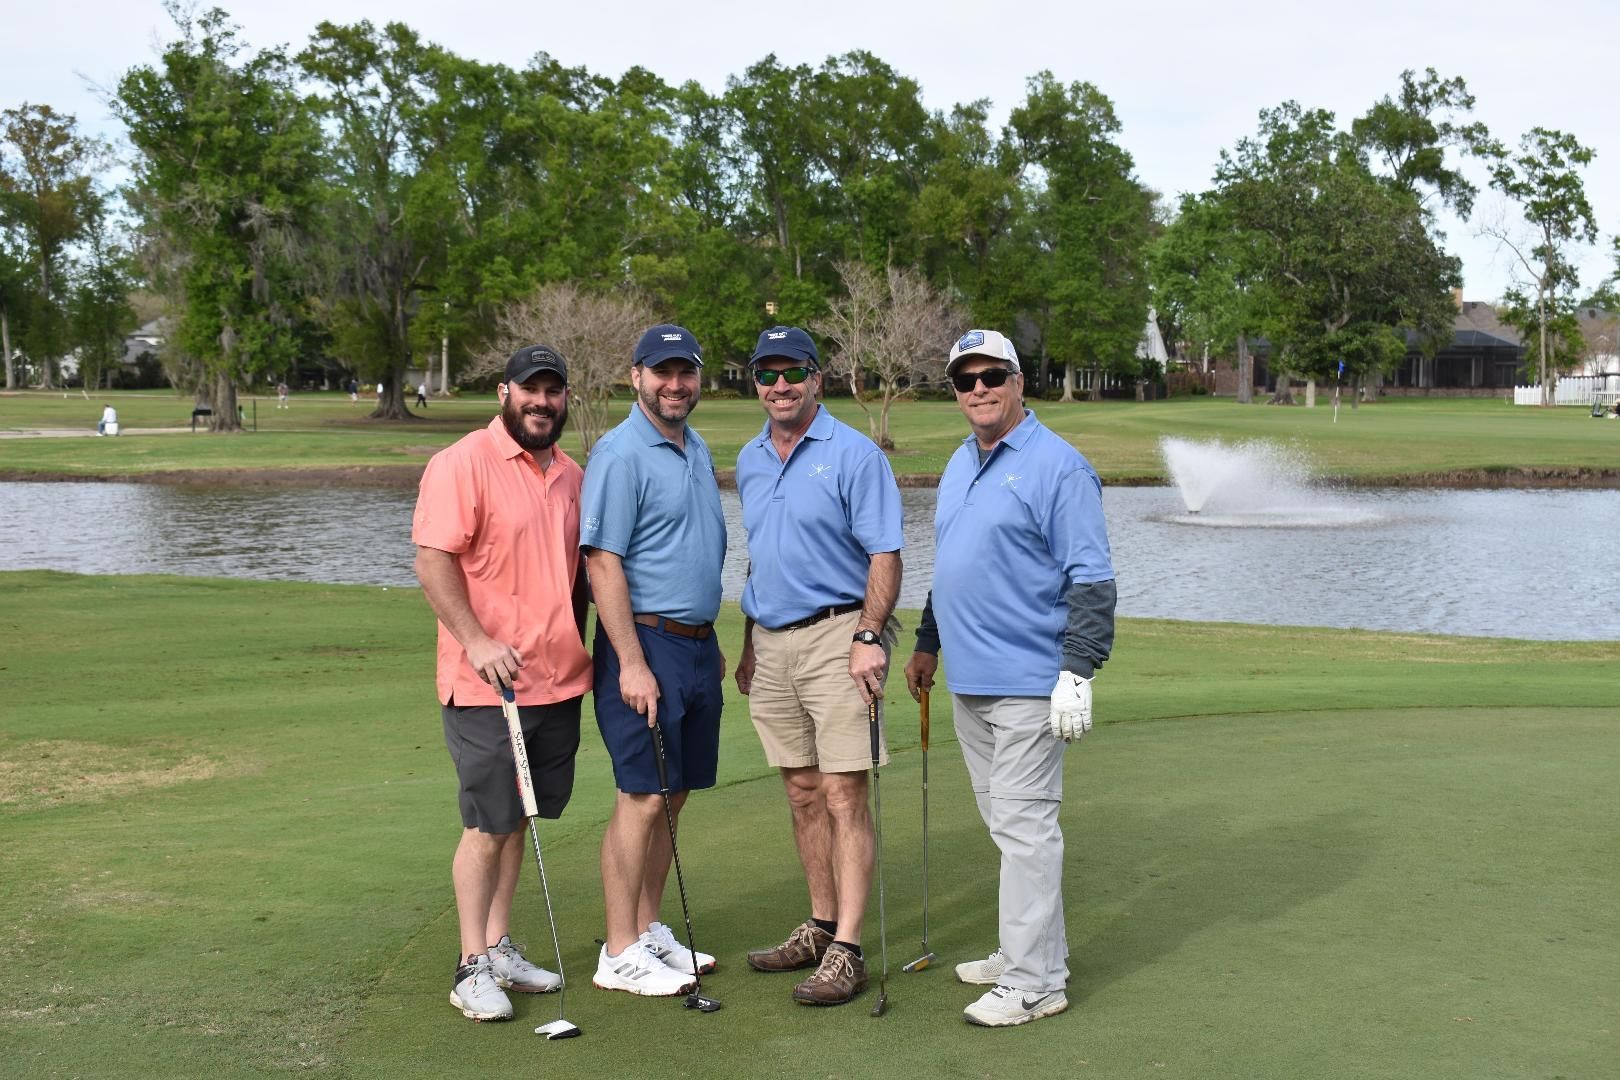 A group of men are standing on a golf course holding golf clubs.